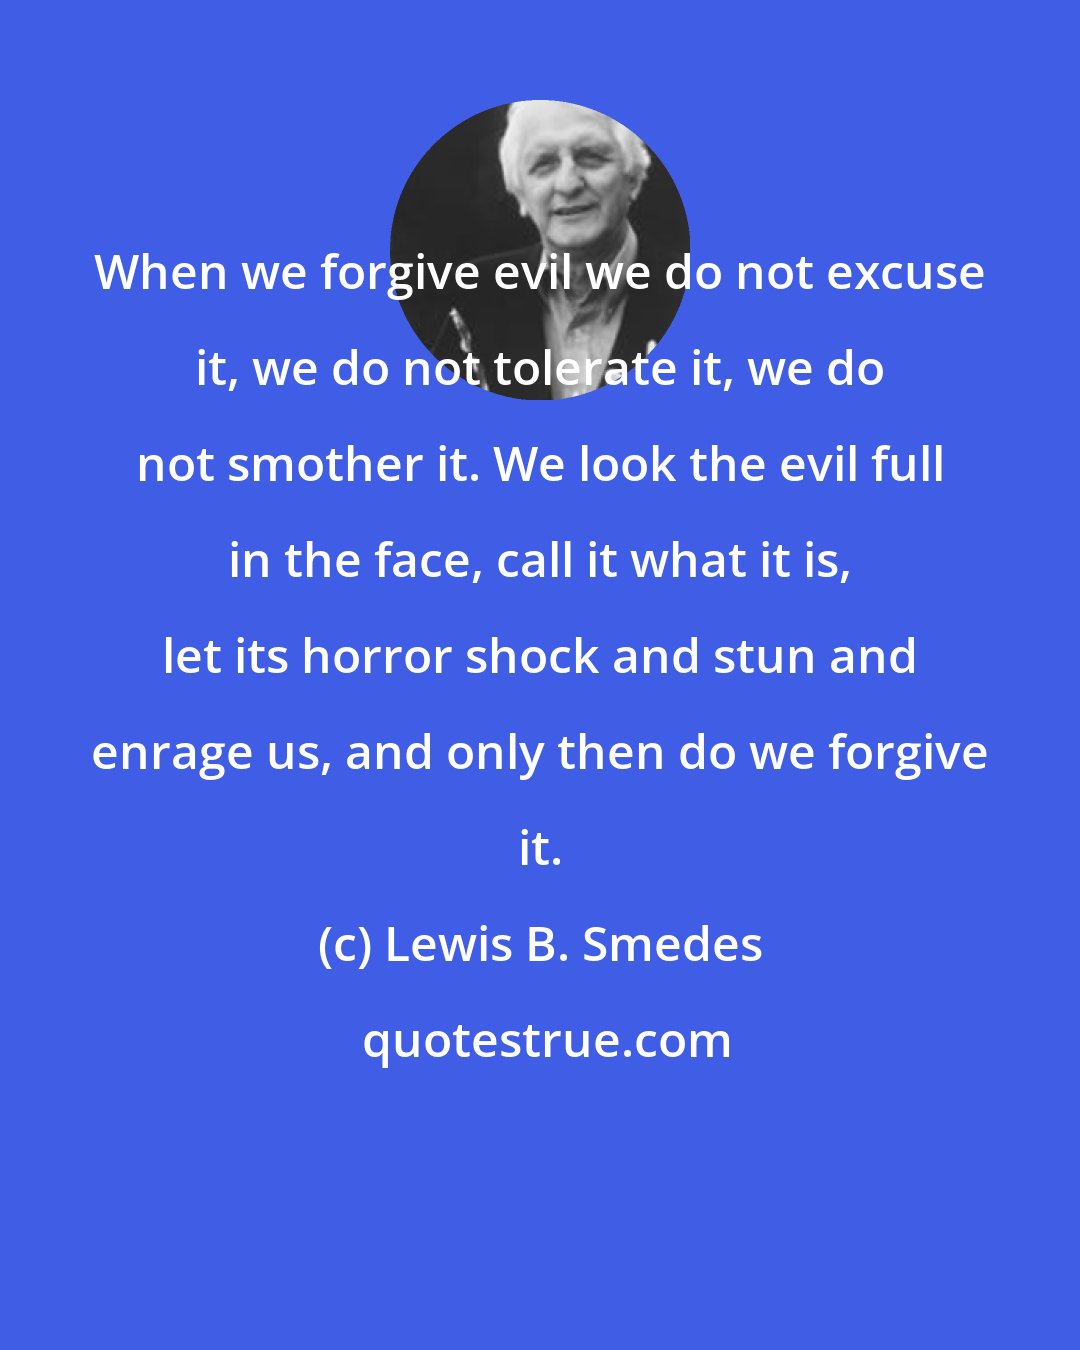 Lewis B. Smedes: When we forgive evil we do not excuse it, we do not tolerate it, we do not smother it. We look the evil full in the face, call it what it is, let its horror shock and stun and enrage us, and only then do we forgive it.